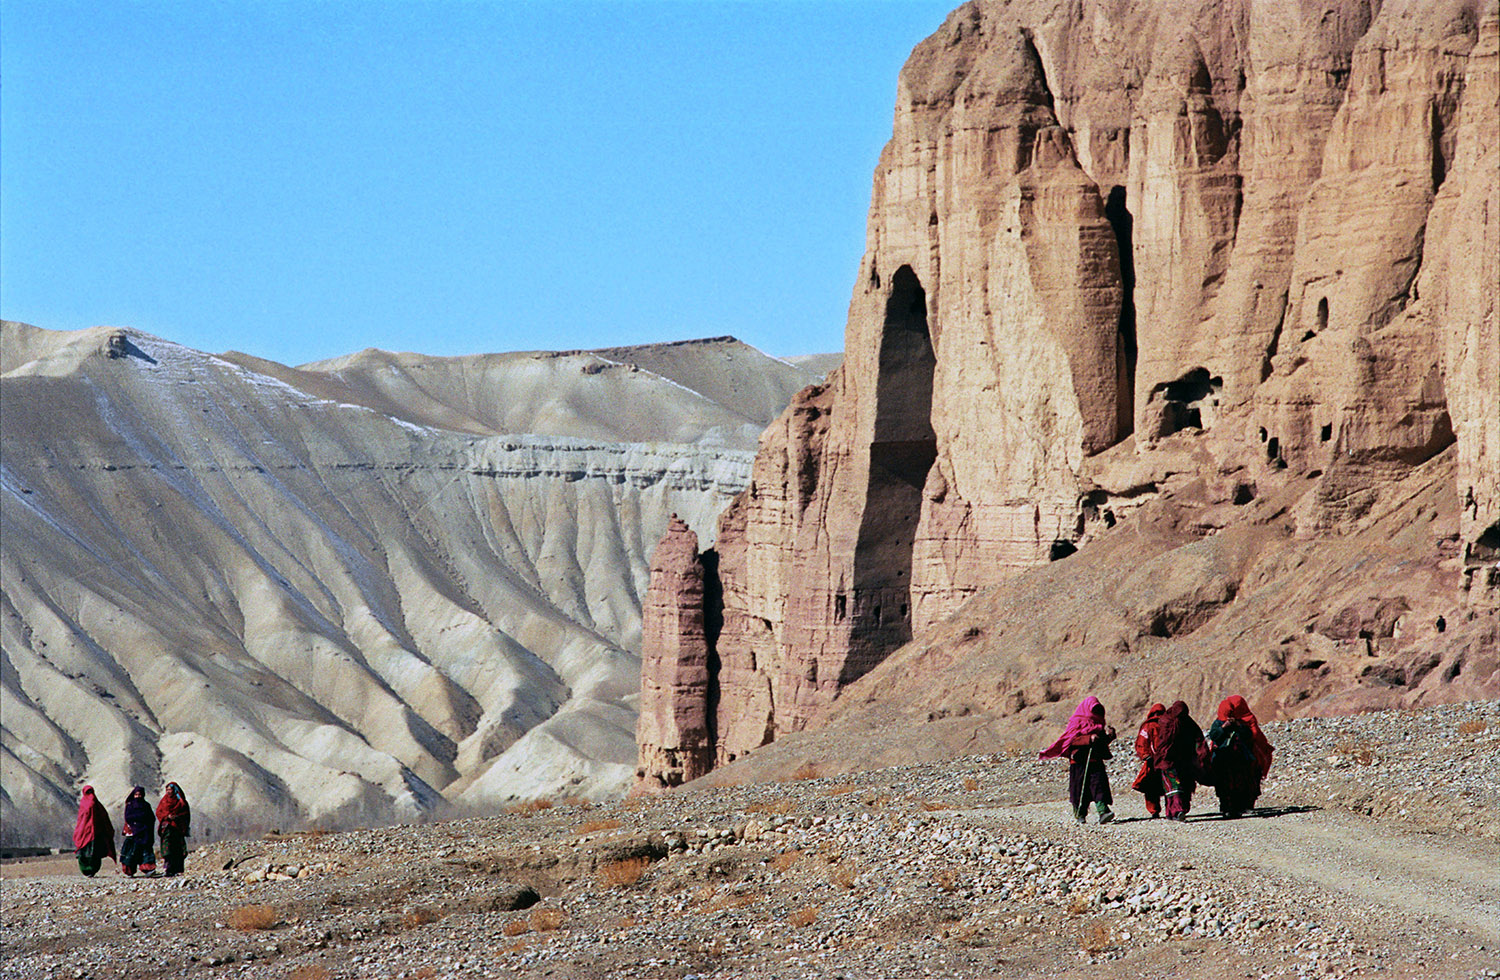 The Buddhas of Bamiyan were destroyed by the Taliban.